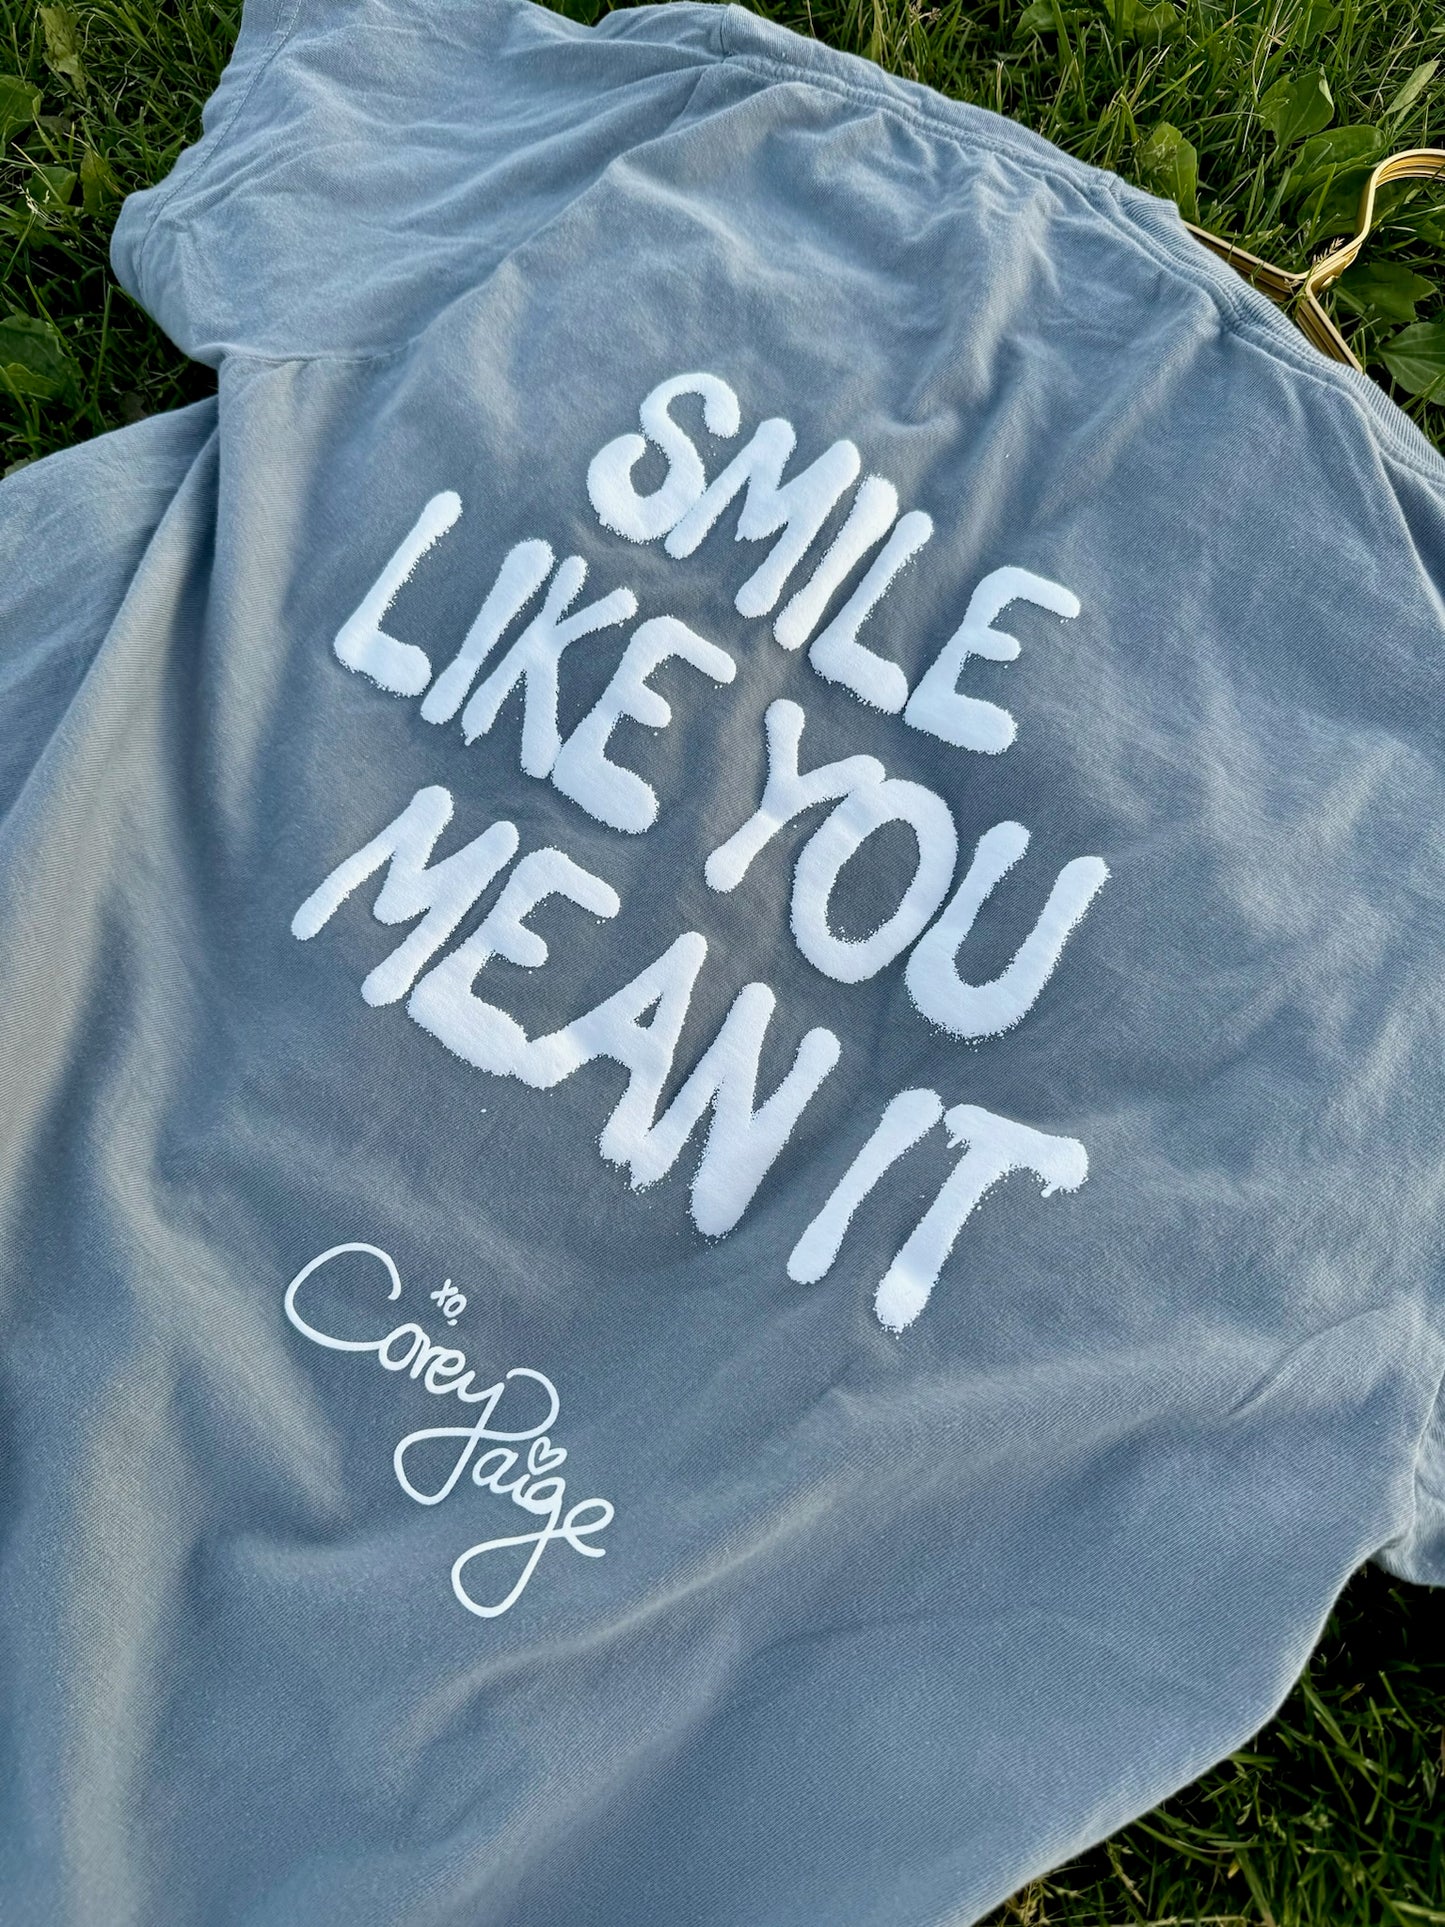 Smile Like You Mean It T-Shirt